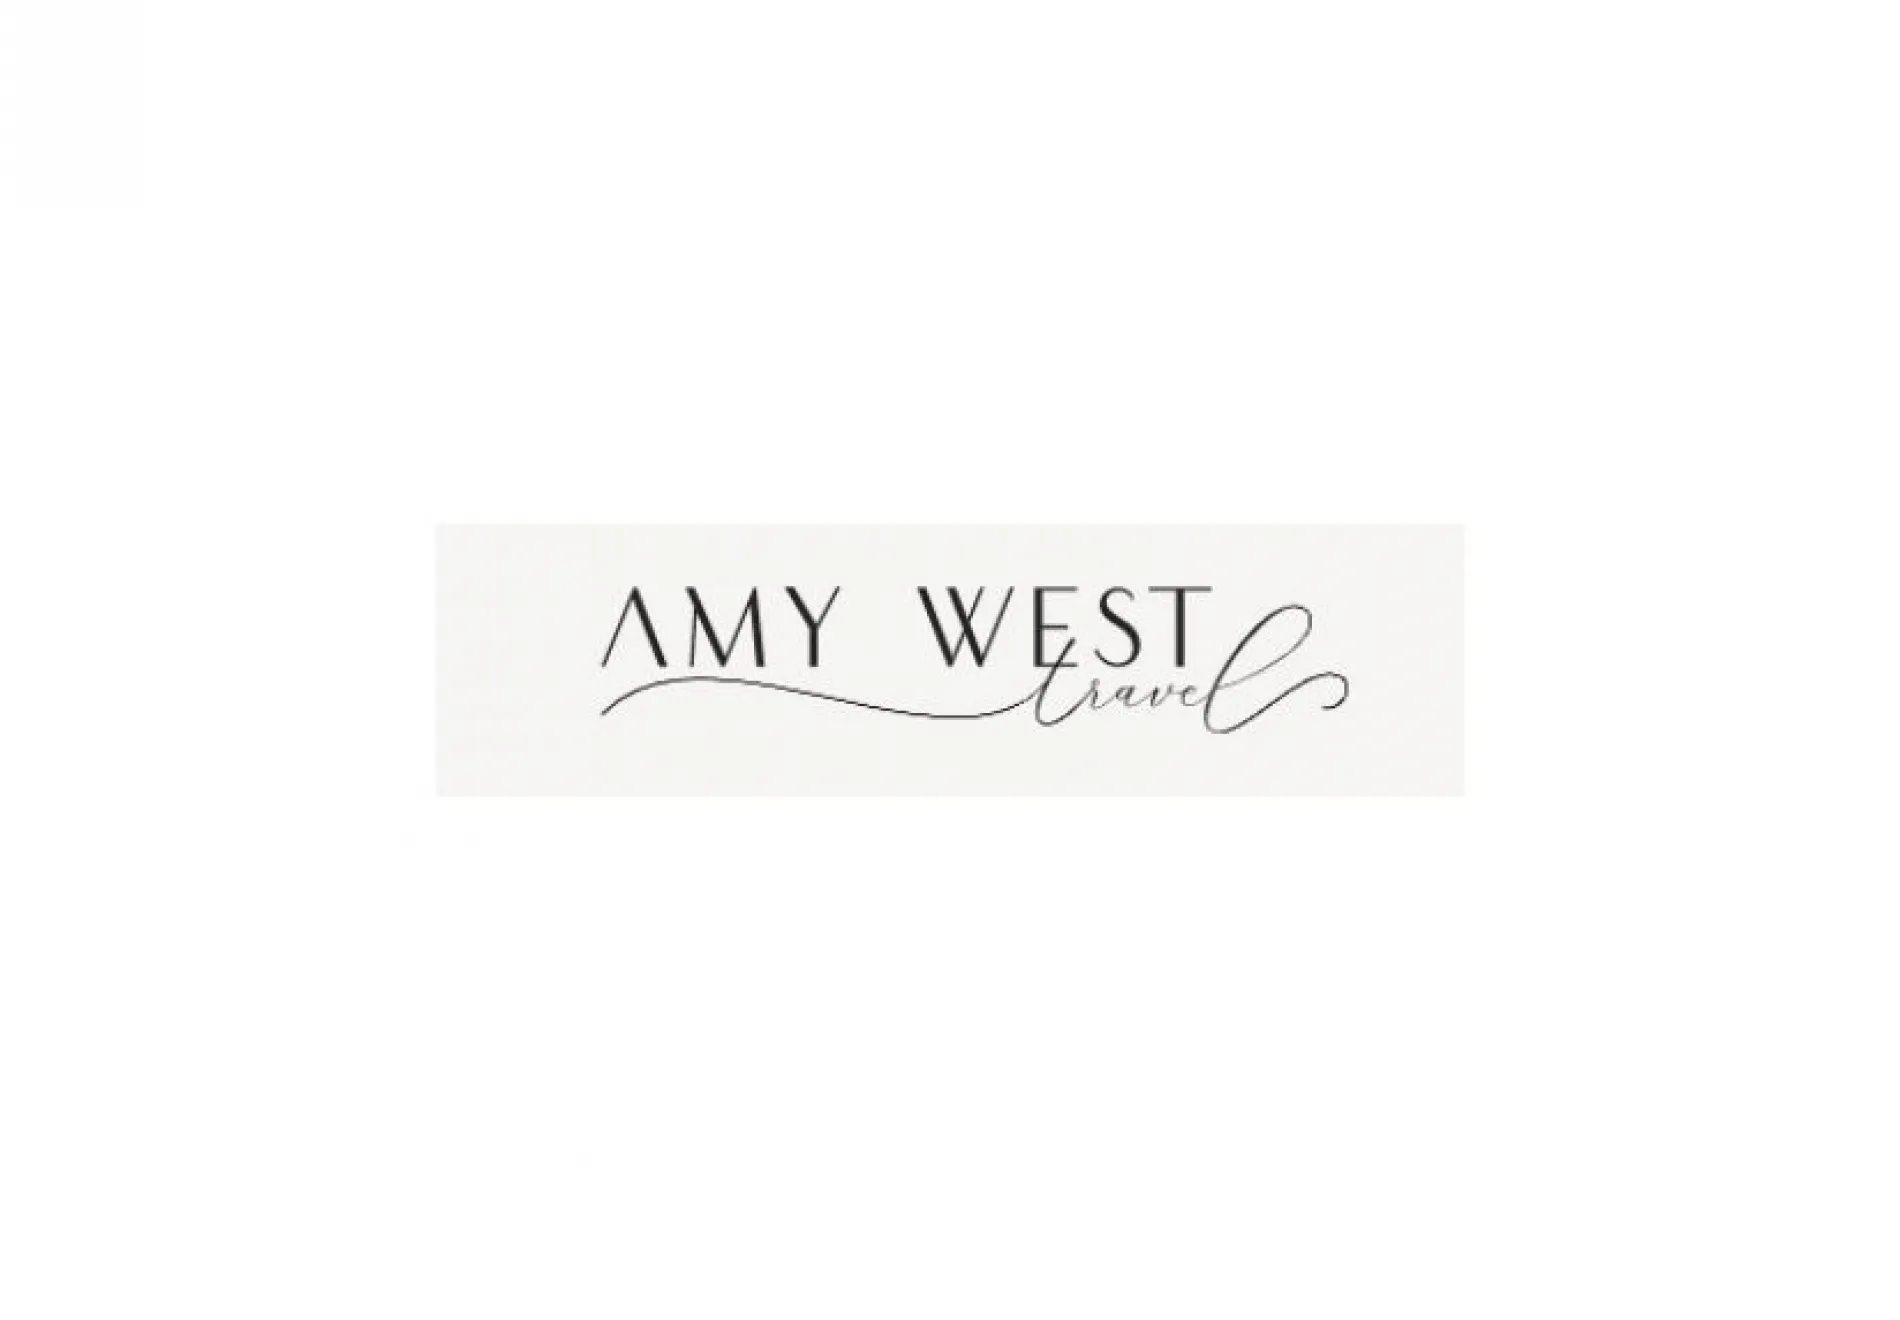 Amy West Travel